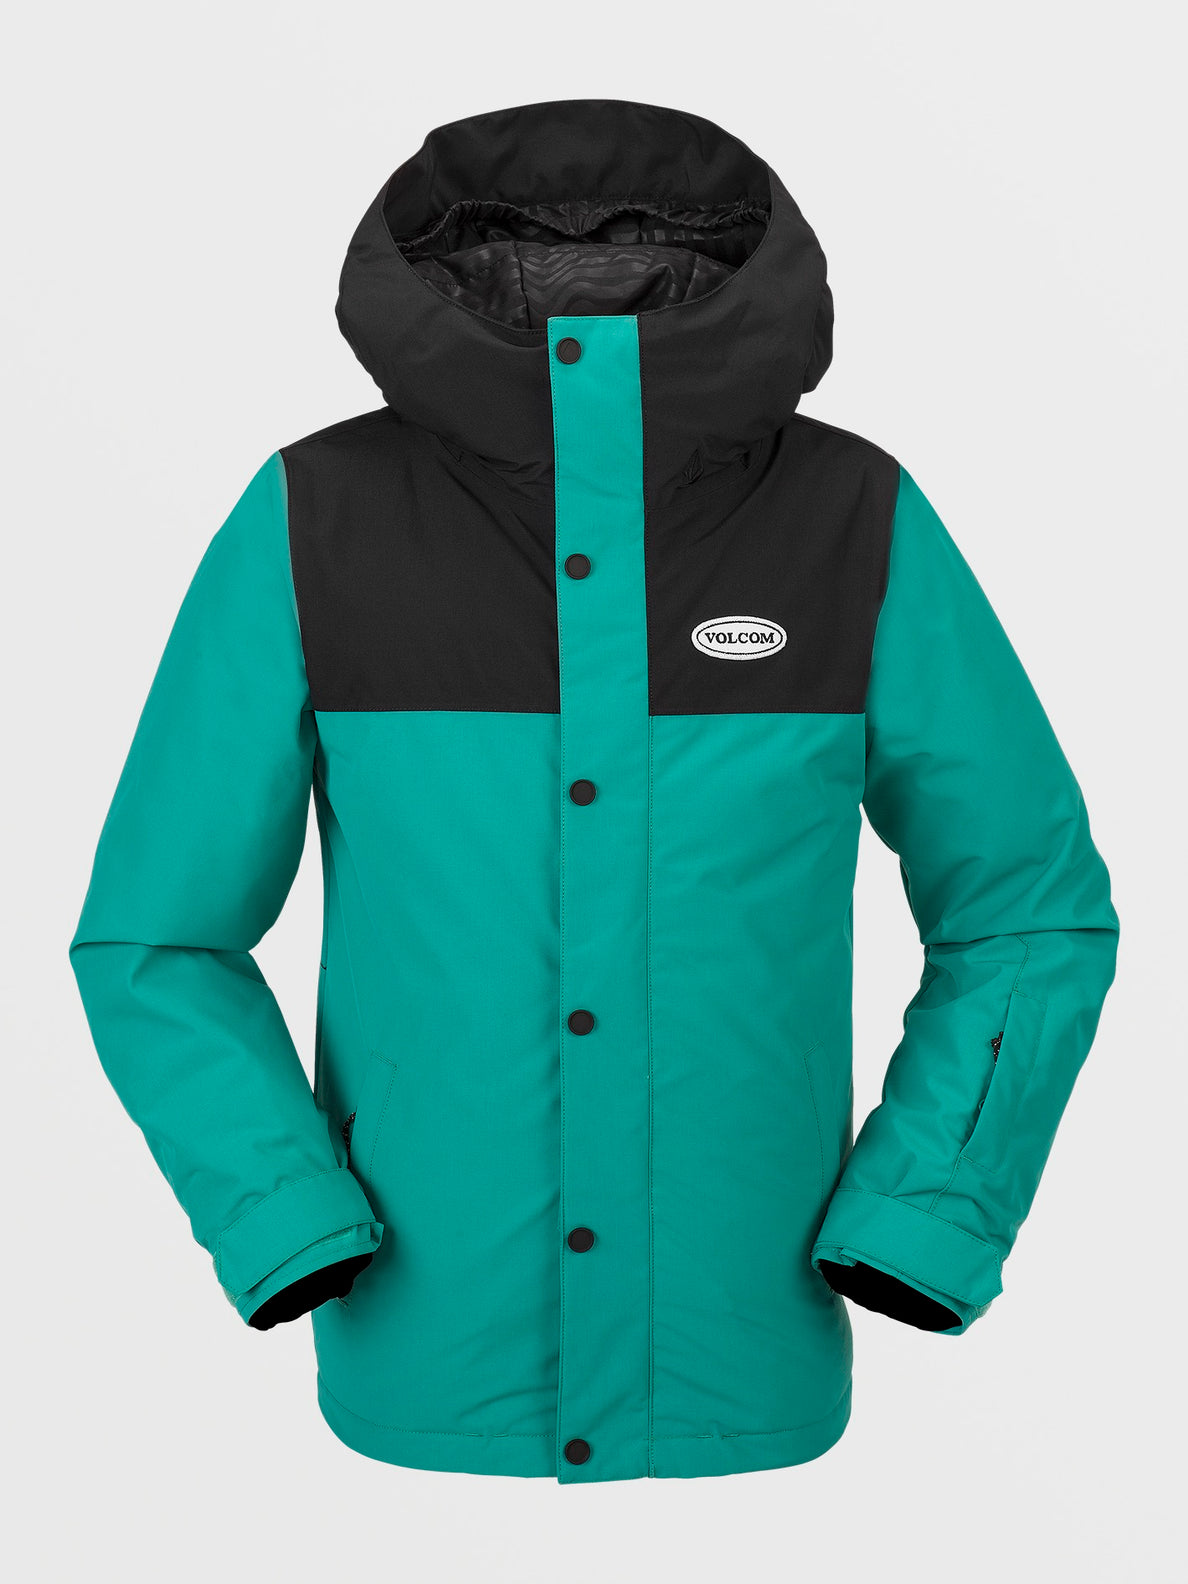 Kids Stone 91 Insulated Jacket - Vibrant Green